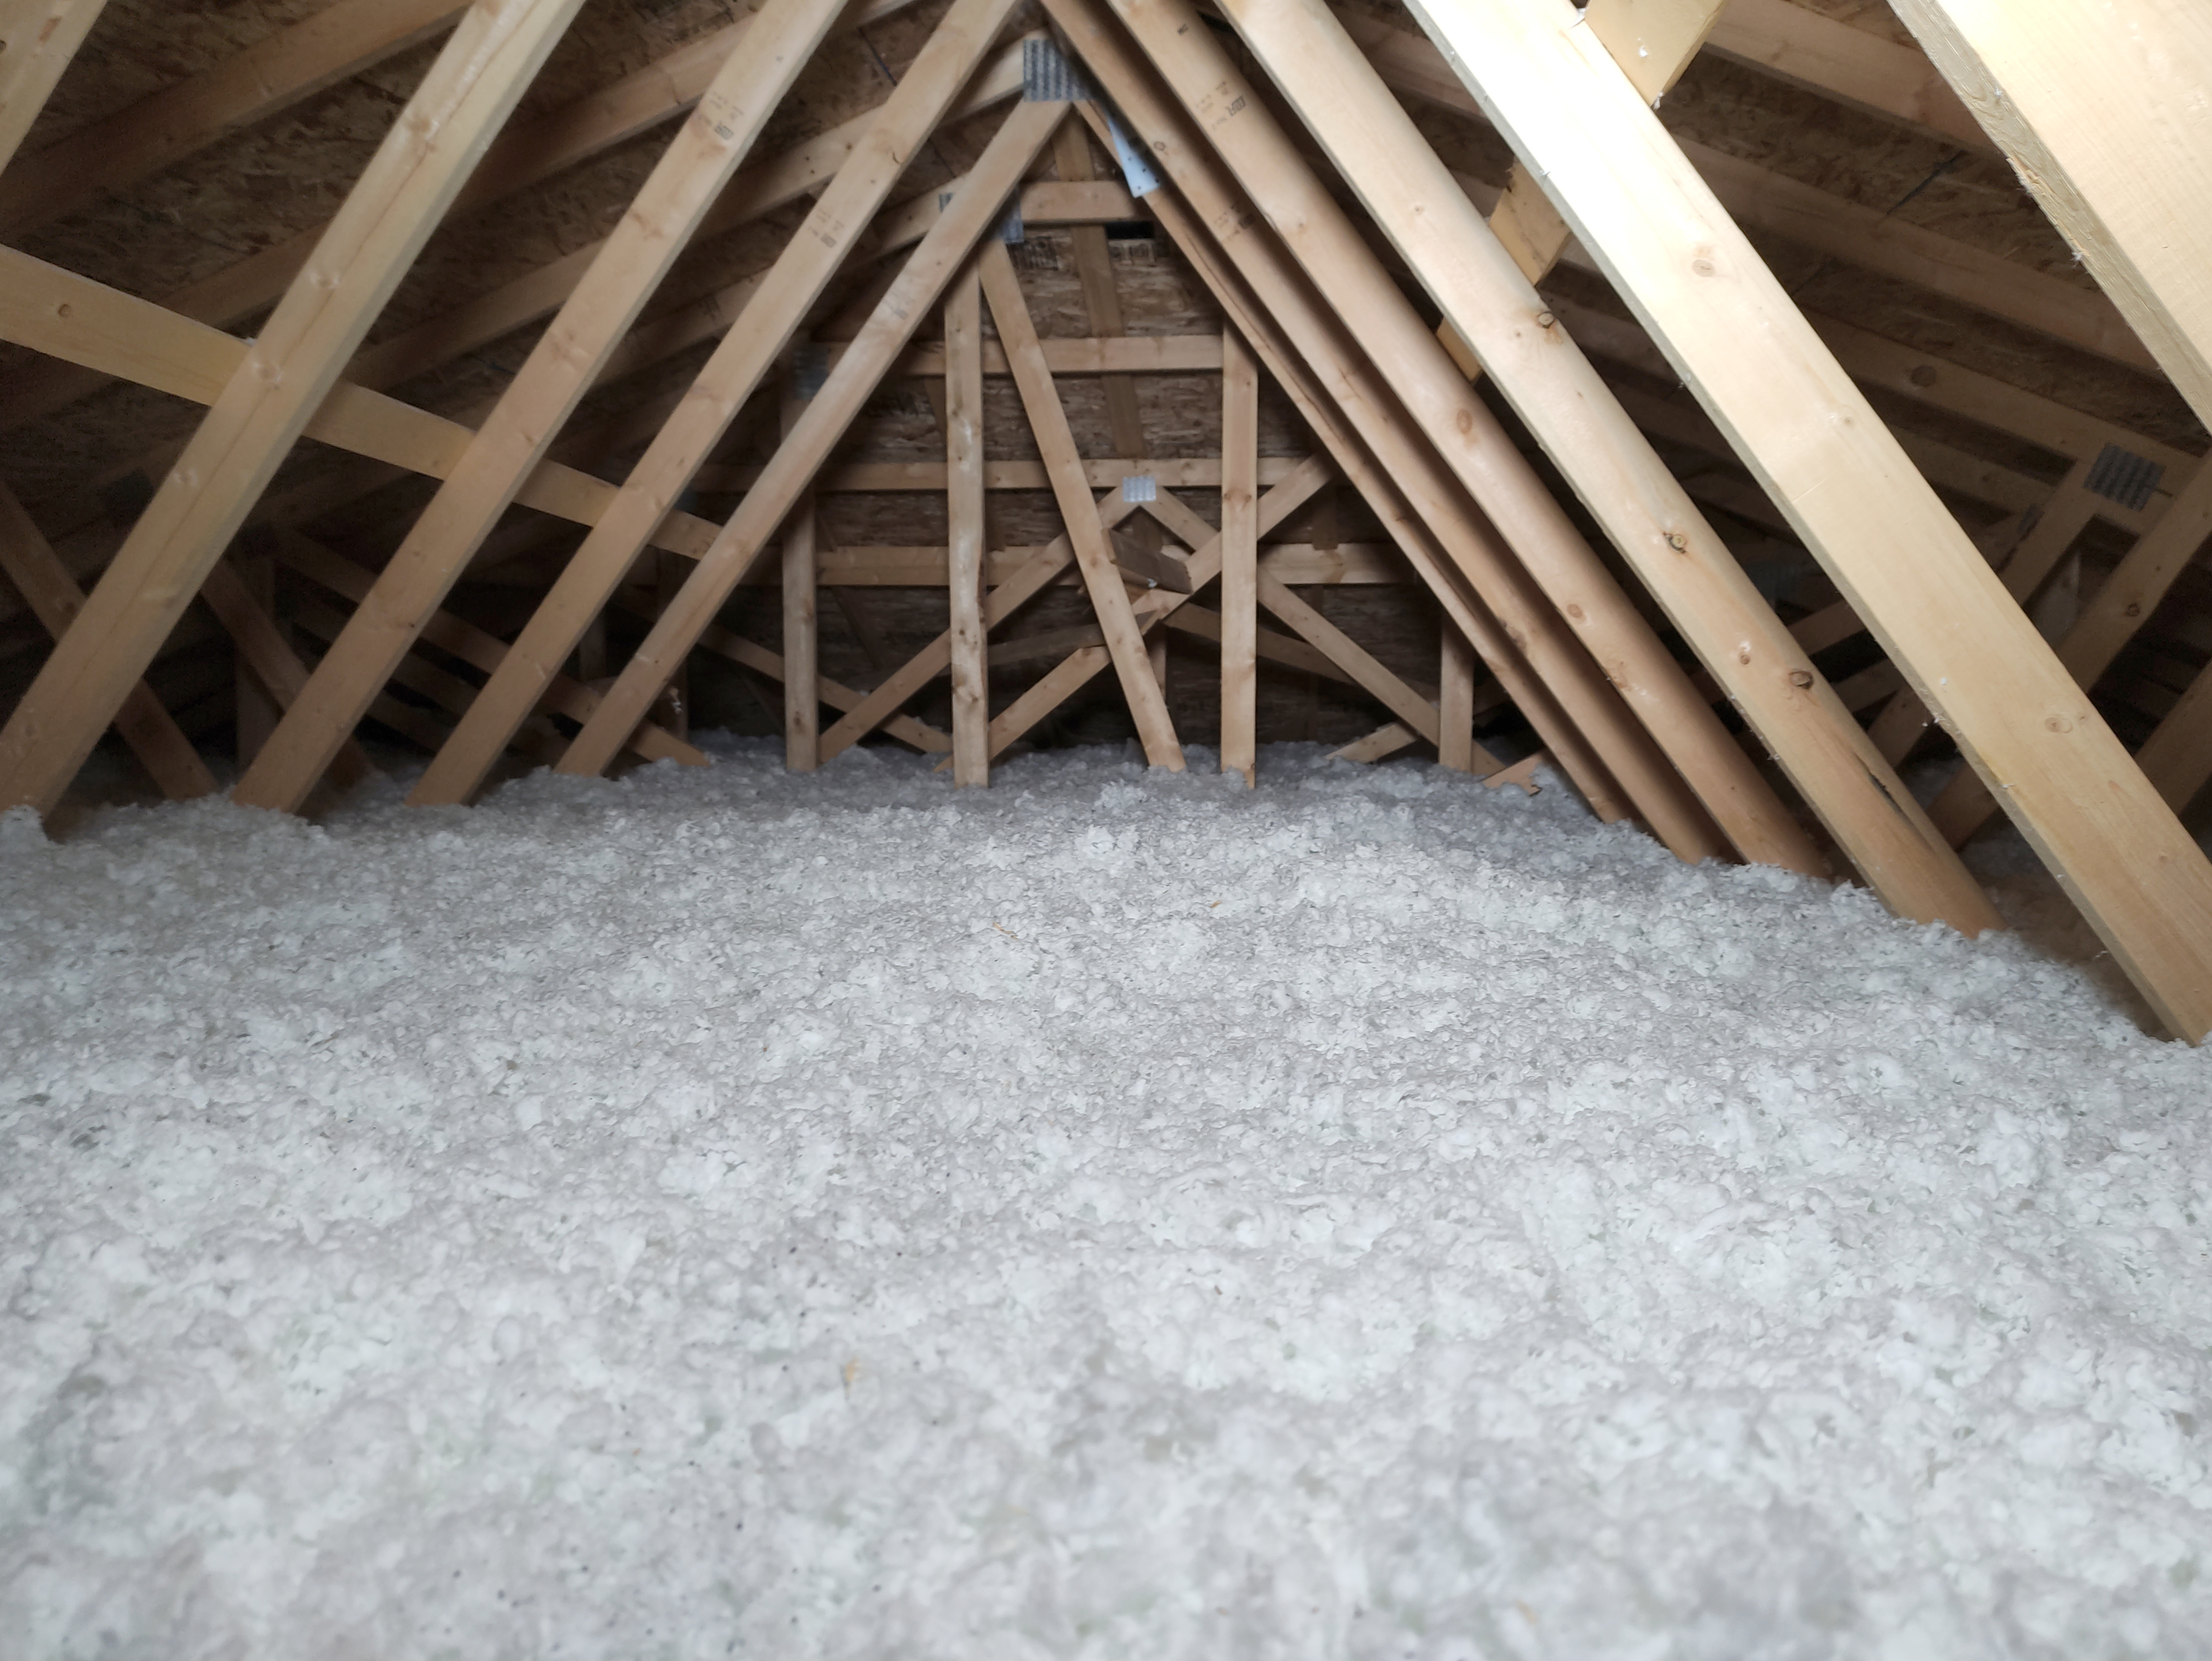 Does Home Insulation Matter as Much in Summer?